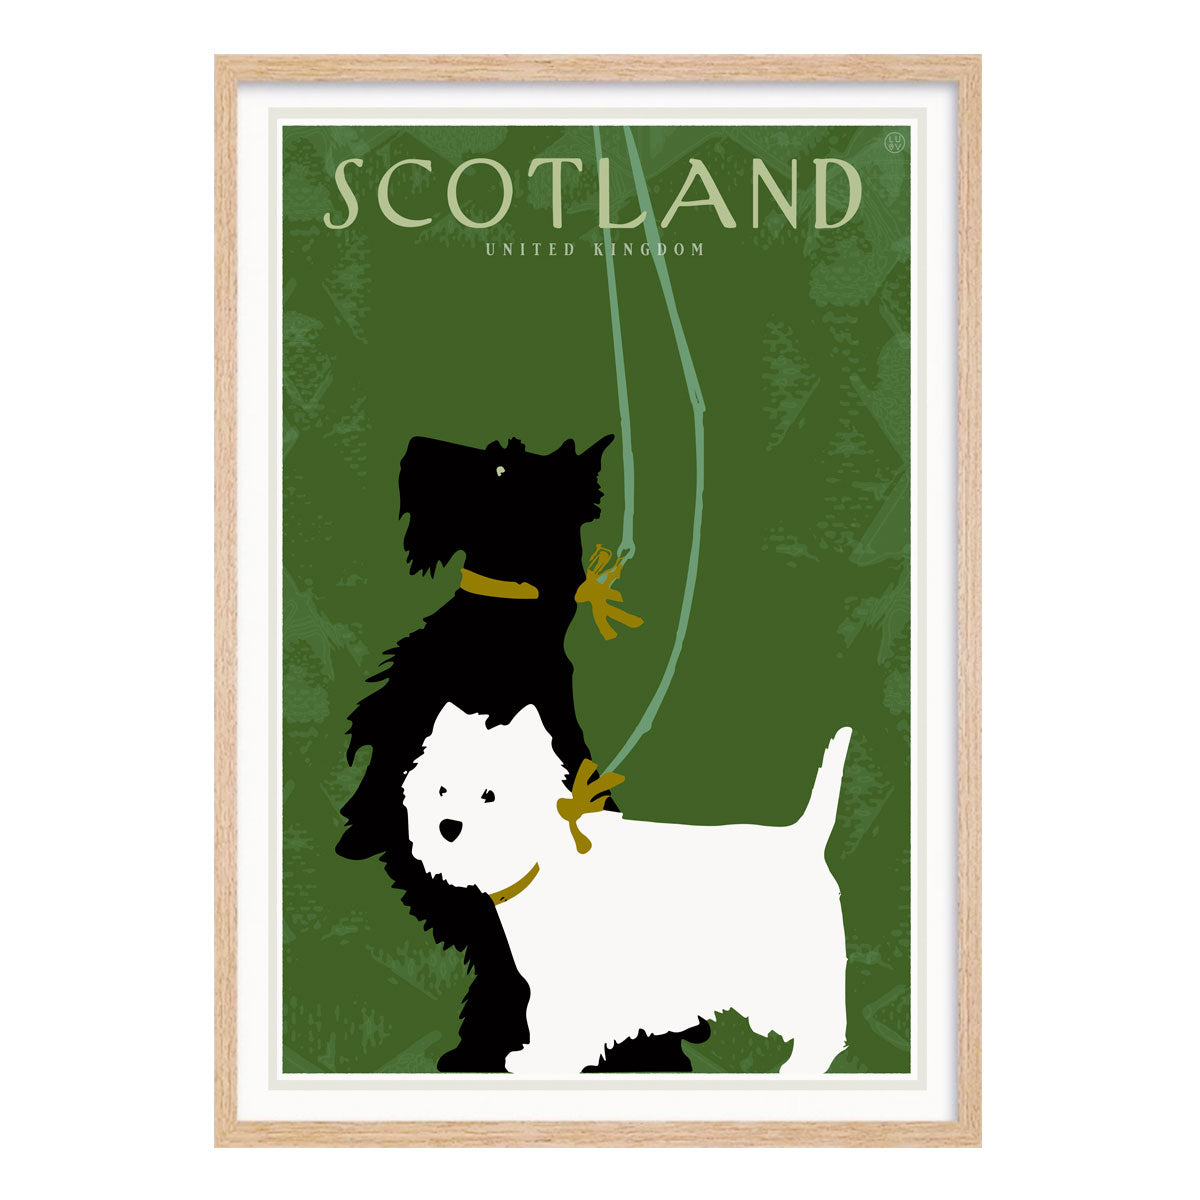 Scotland retro vintage travel poster print in oak frame from Places We Luv